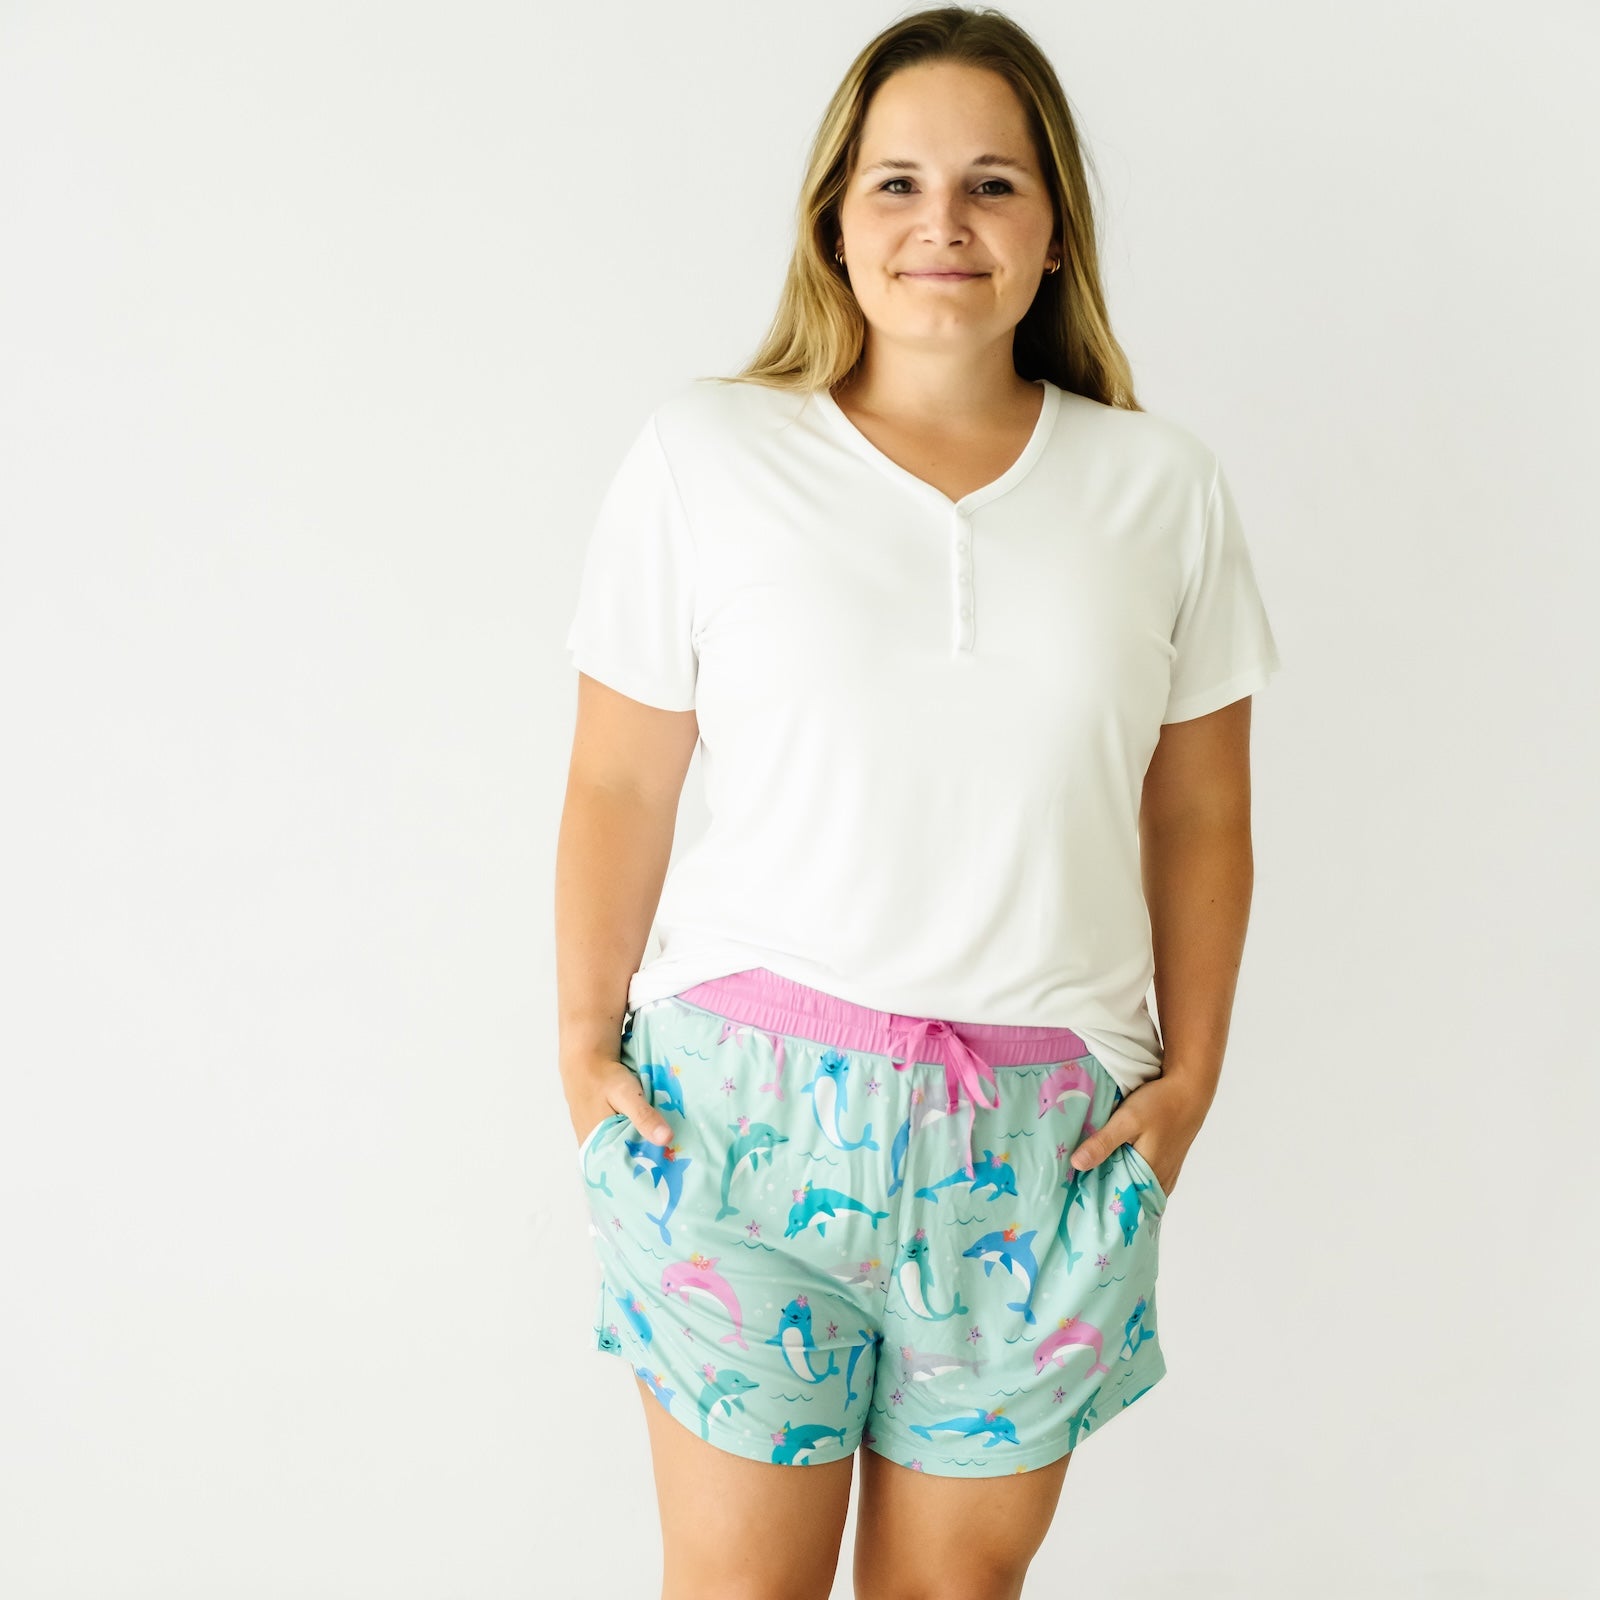 Woman wearing a Bright White women's short sleeve pajama top and coordinating pajama shorts